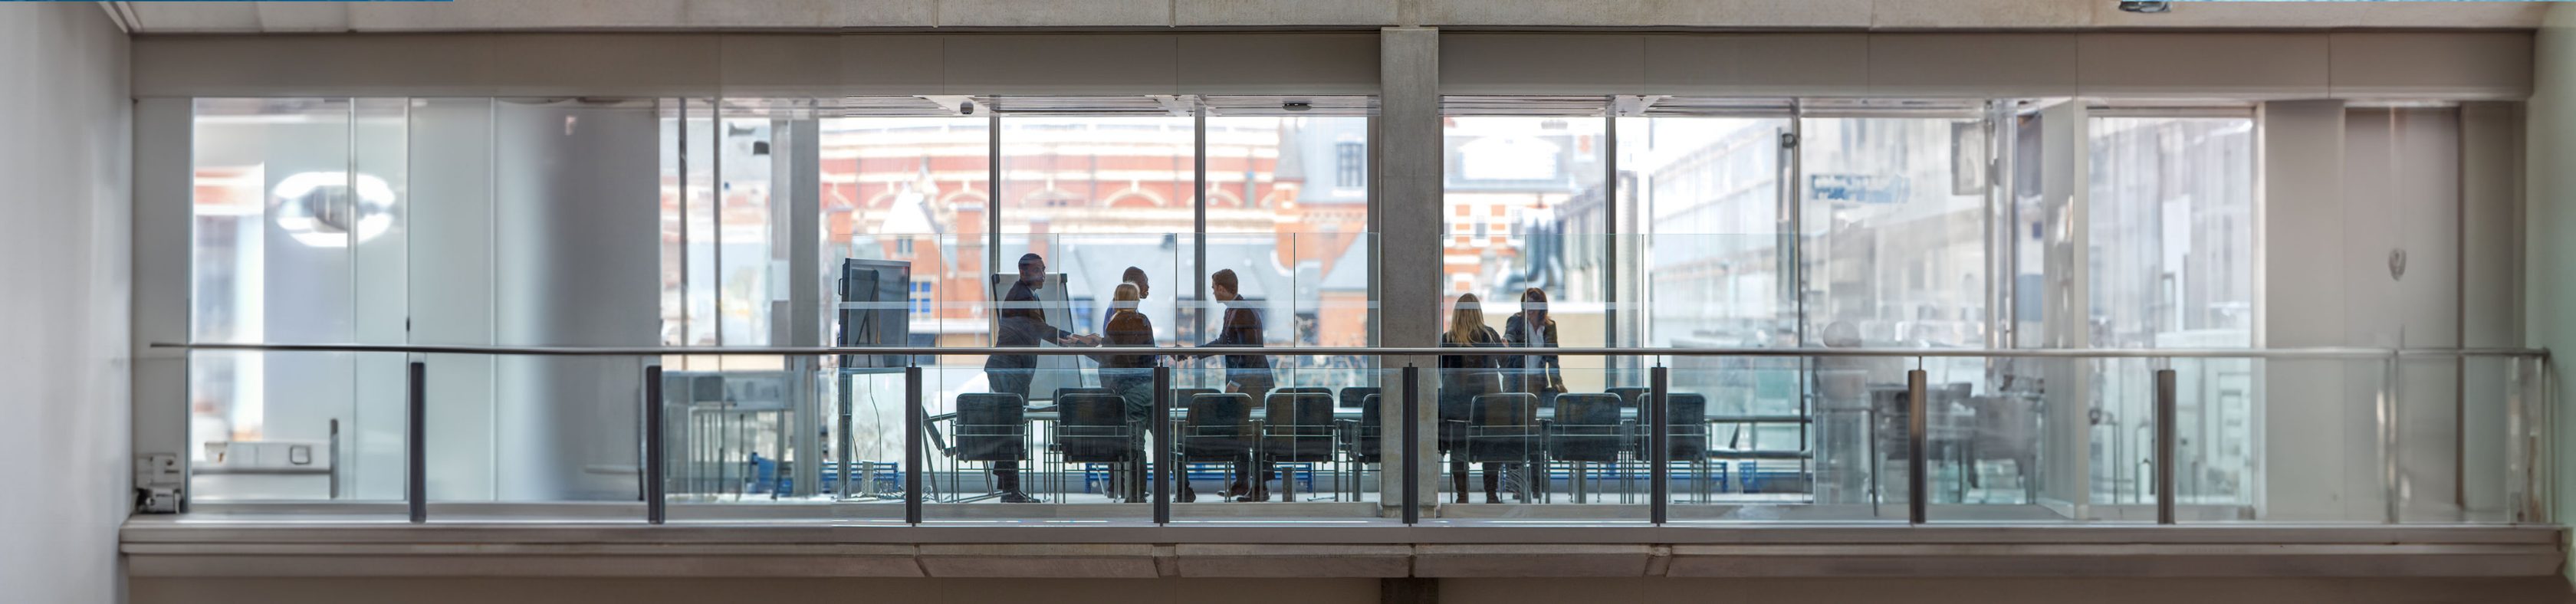 People during a conference in a glass room